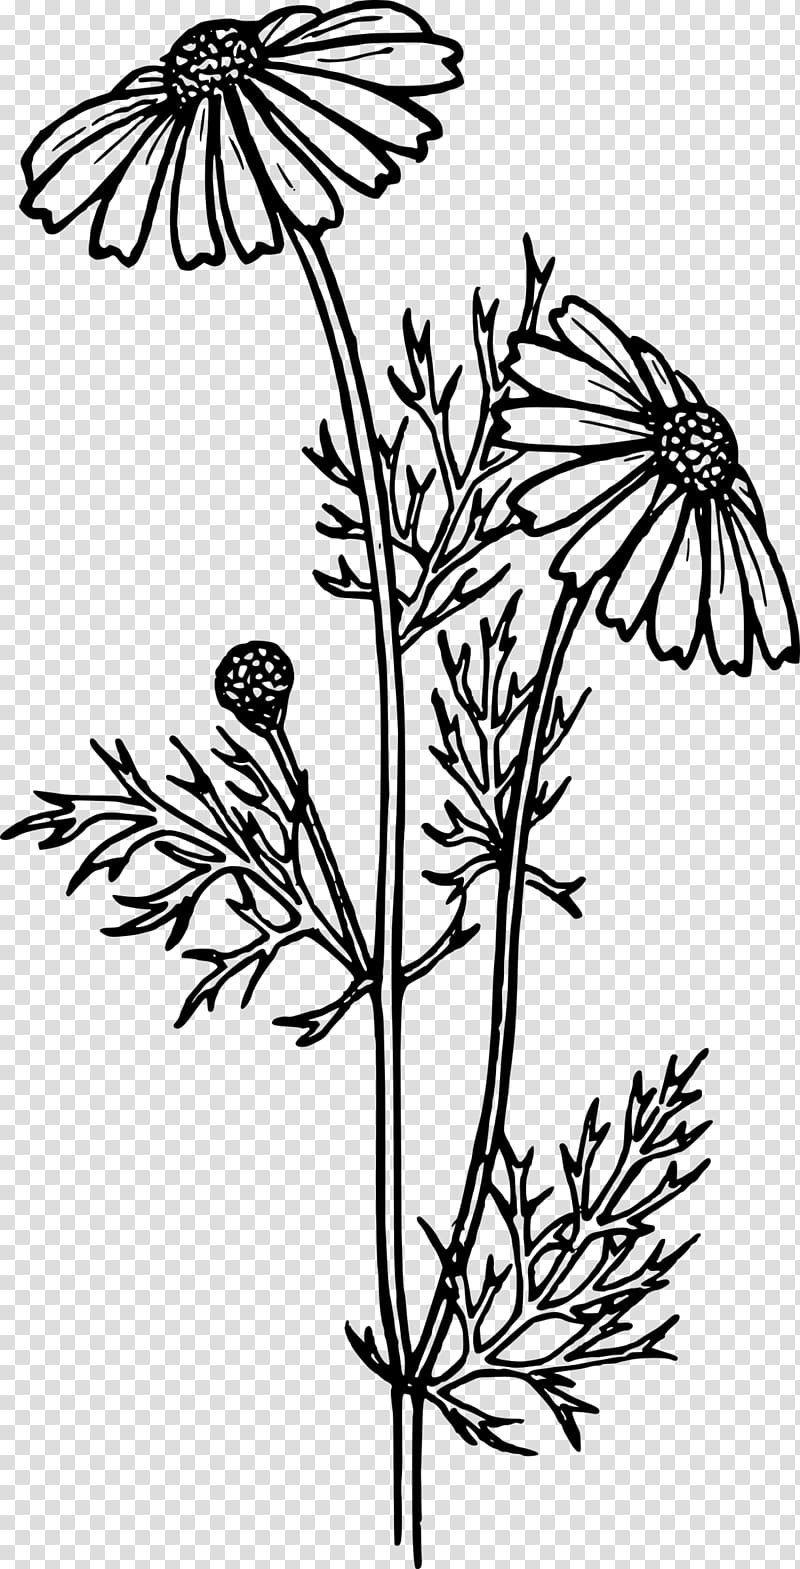 Drawing Of Family, Feverfew, Line Art, Coloring Book, Plant, Flower, Plant Stem, Pedicel transparent background PNG clipart